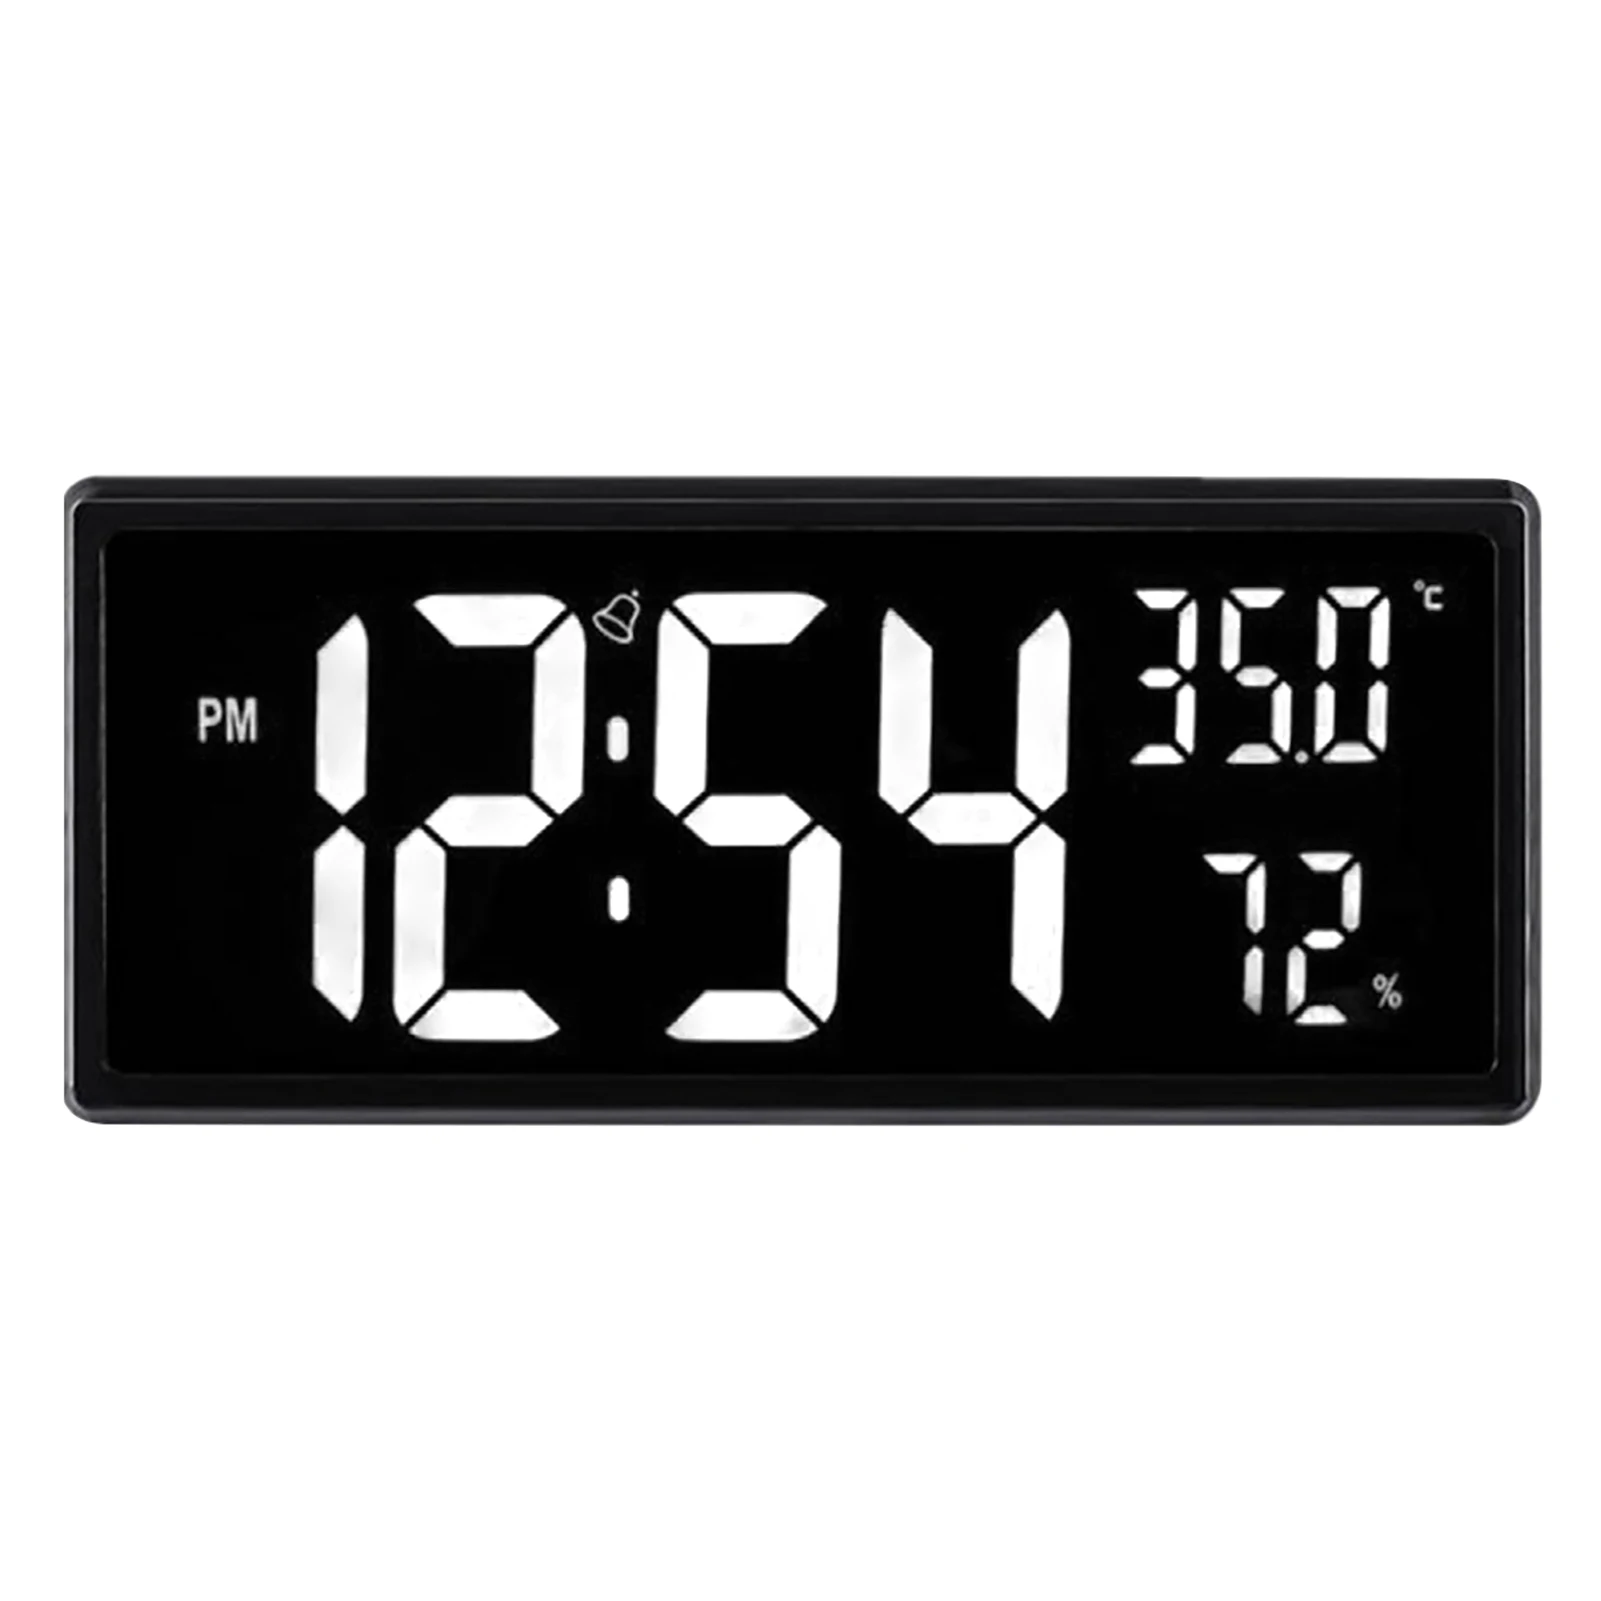 

Humidity ABS White With Temperature USB Powered Alarm For Bedroom Date Living Room Large Display Digital Clock HD LED Bedside